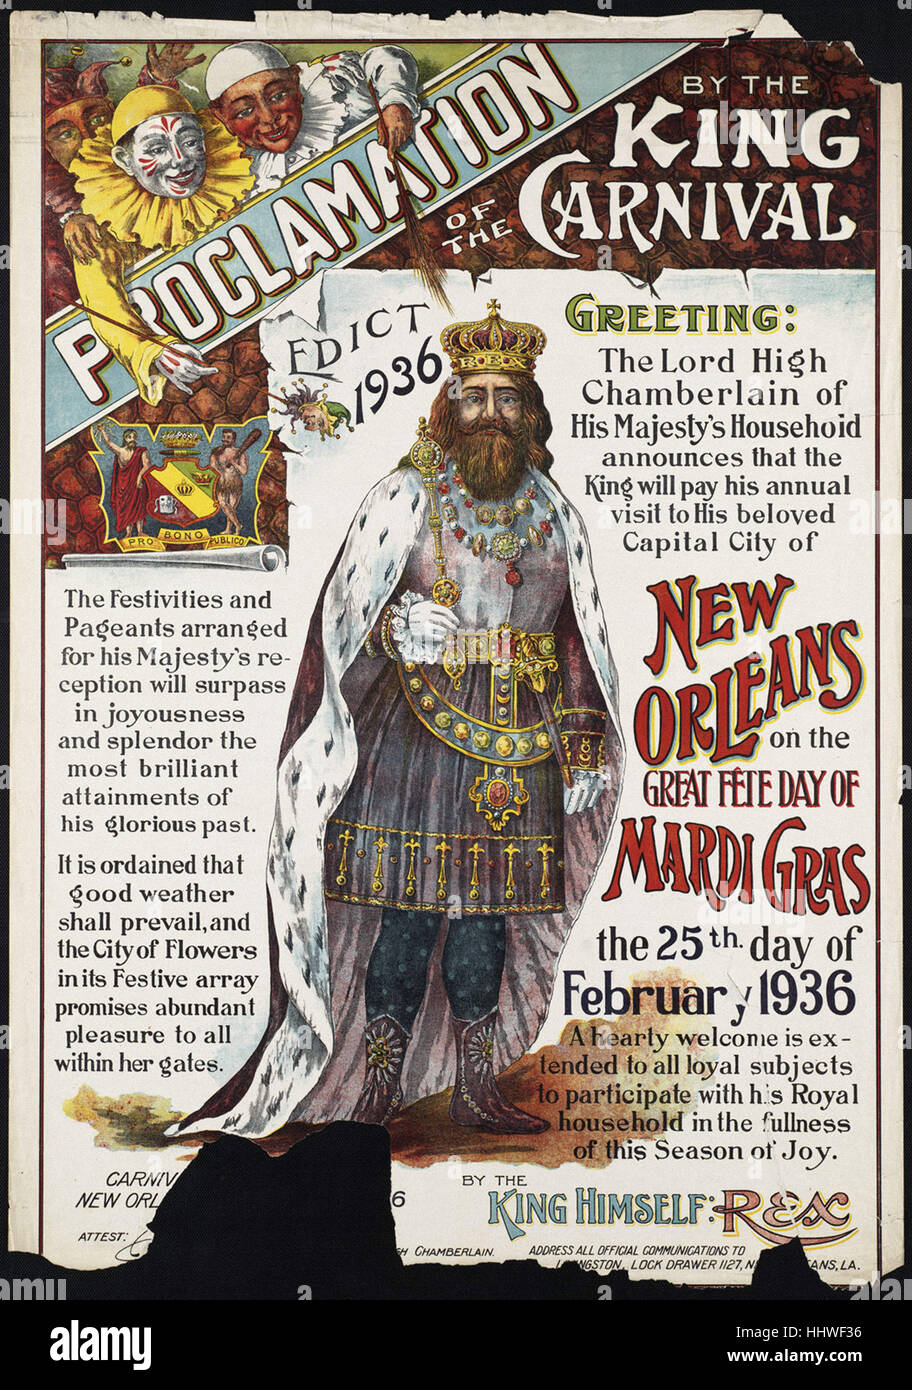 Proclamation by the King of the Carnival  - Vintage travel poster 1920s-1940s Stock Photo